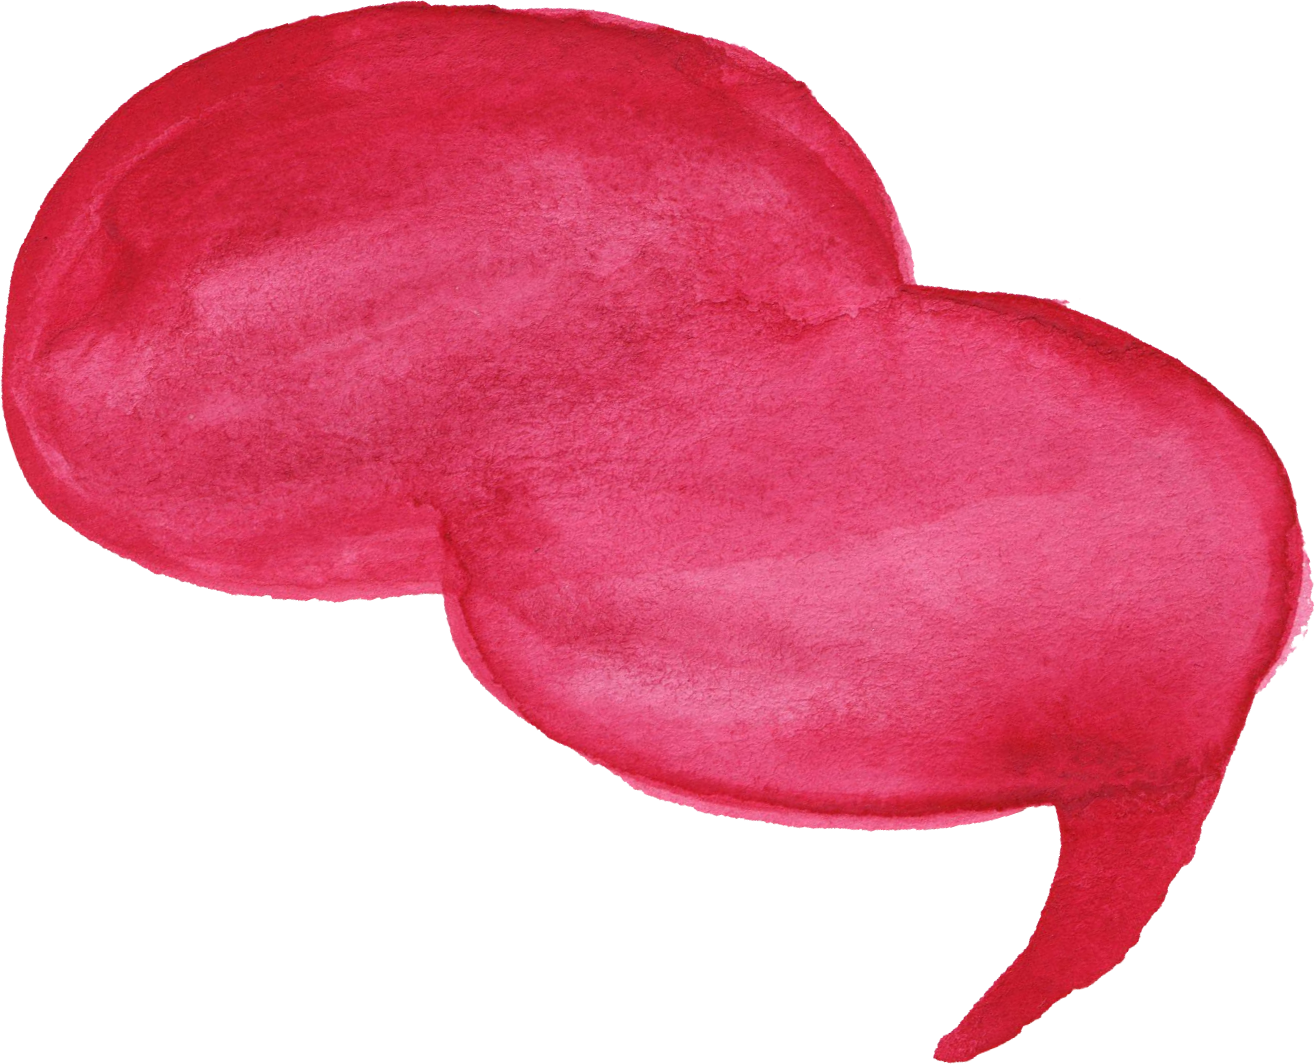 Speech Bubble Transparent Png Download - Watercolor Painting (1316x1064), Png Download